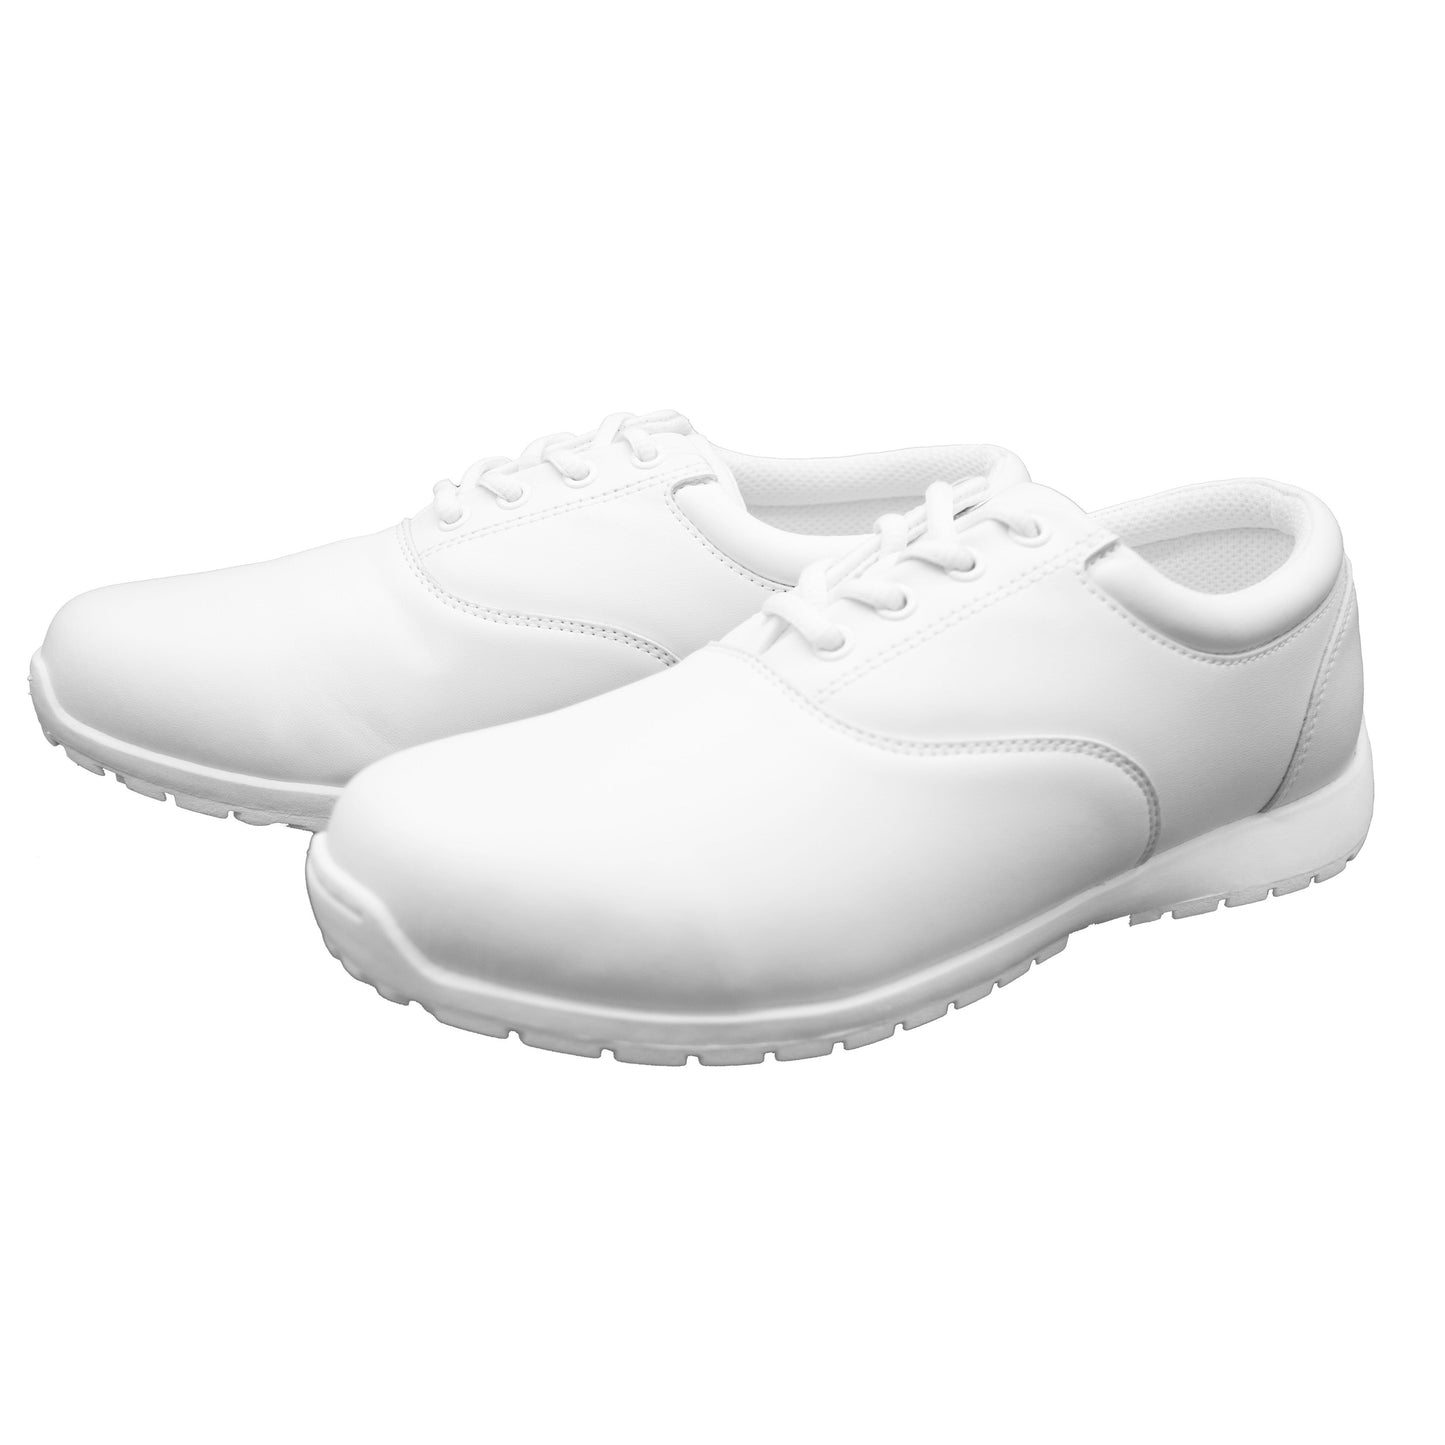 New! White Fanfare by DeMoulin™ Marching Band Shoe